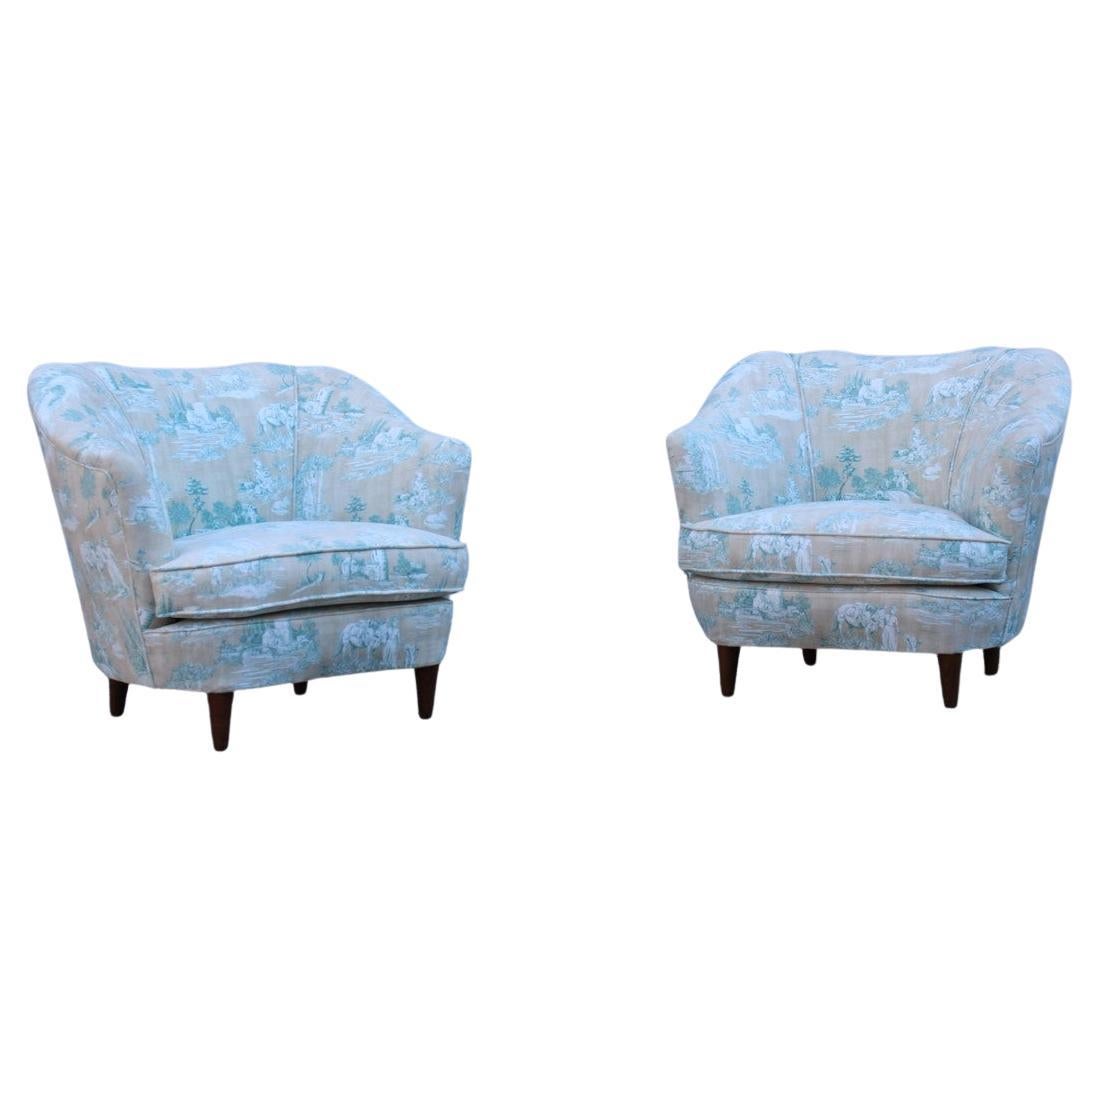 Pair of Italian Decorative armchairs from the 1950s in the style of Gio Ponti For Sale